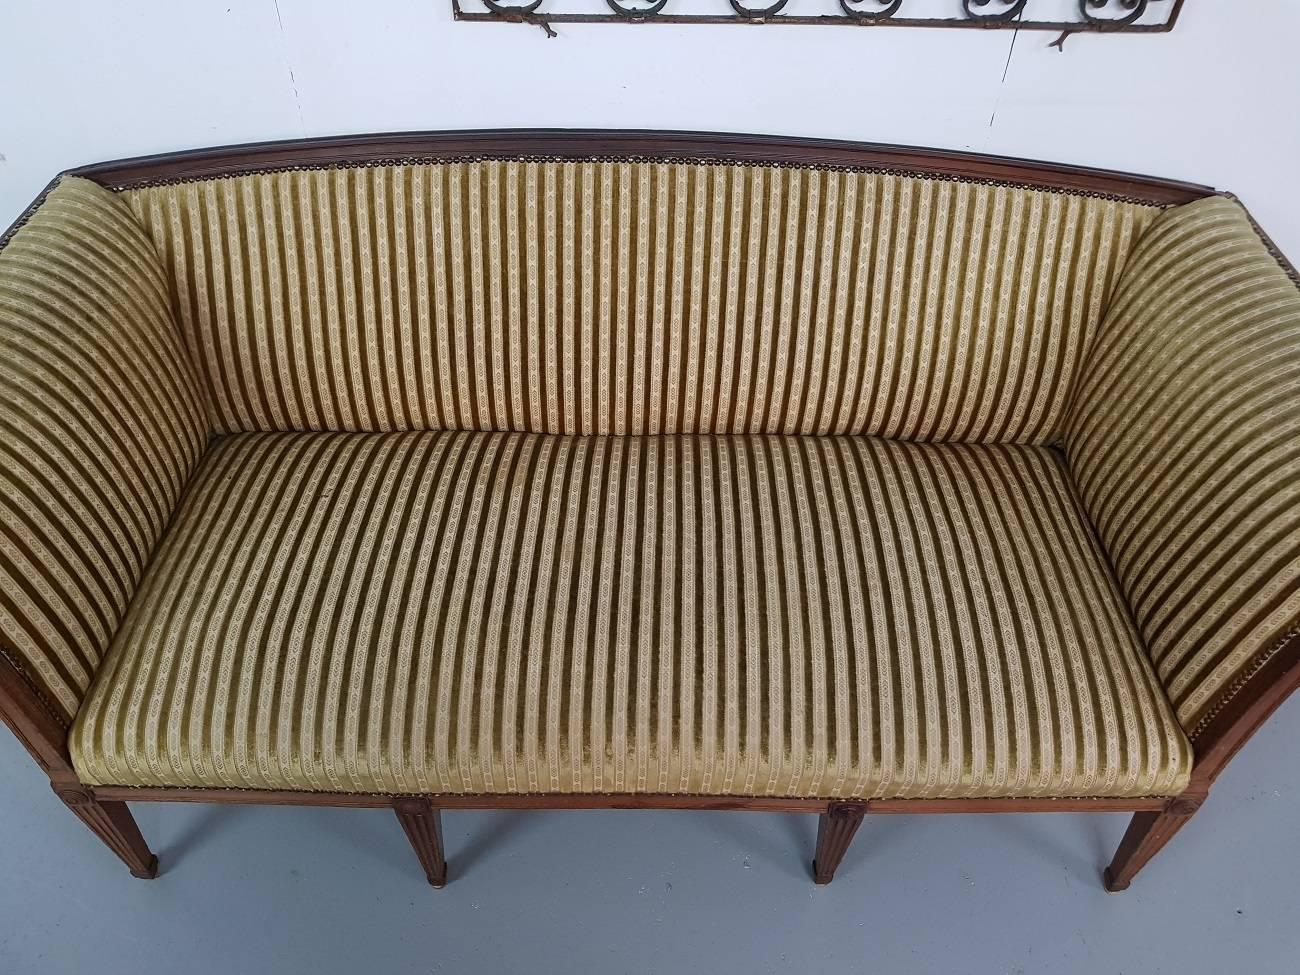 French antique 19th century mahogany wooden Louis XVI style sofa with striped velvet upholstery from the 1950s. It has some old restorations around and need some attention but when refinished a lovely piece.

The measurements are,
Depth 75 cm/